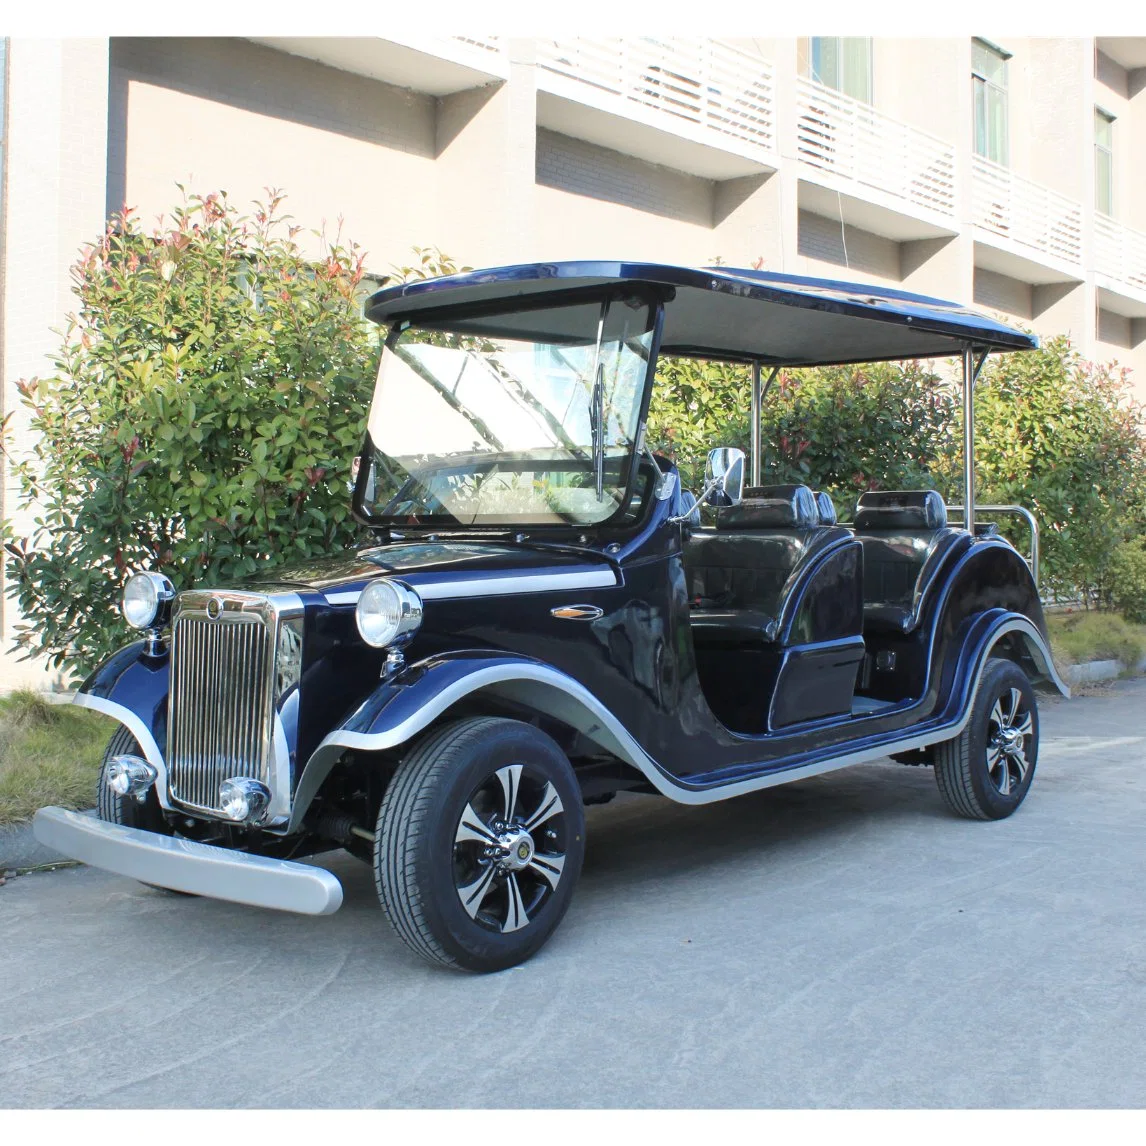 China Made Cheapest Price Golf Club Car Sightseeing Bus Electric Golf Carts Electric 2 to 4 to 6 to 8 Seats Reception Car